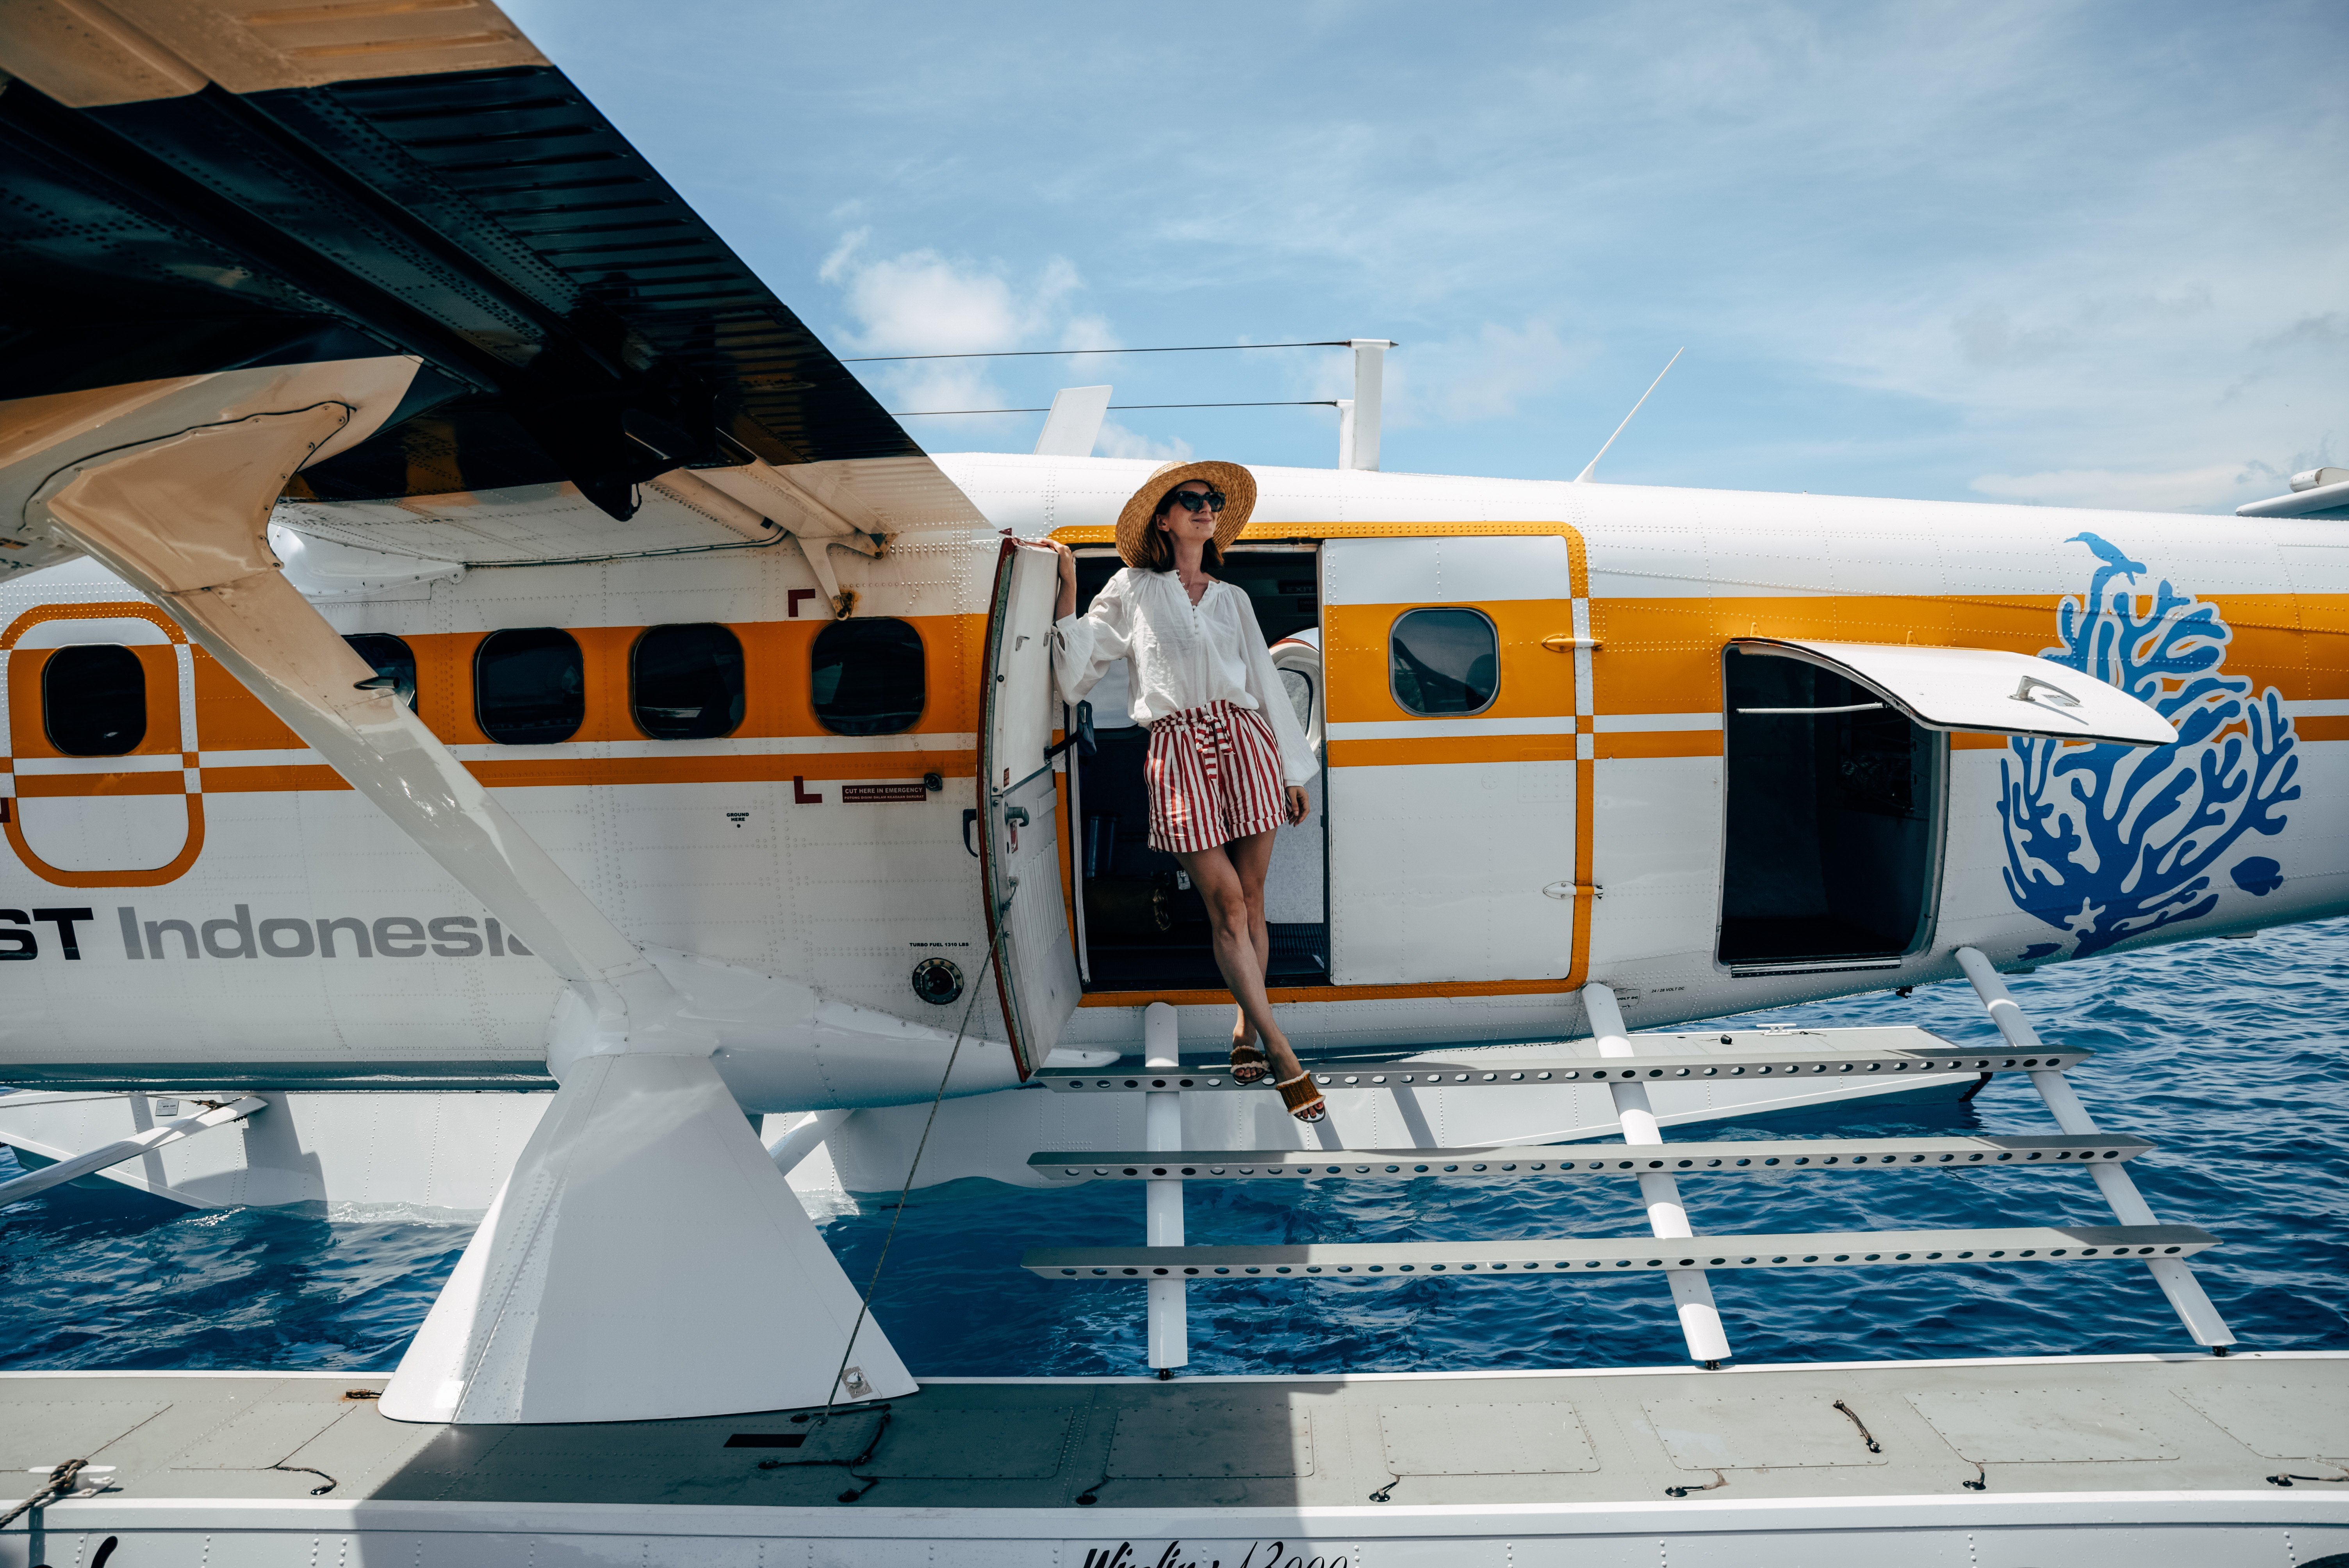 white_woman_sunglasses_straw_hat_striped_shorts_standing_in_front_of_bawah_seaplane_stairs